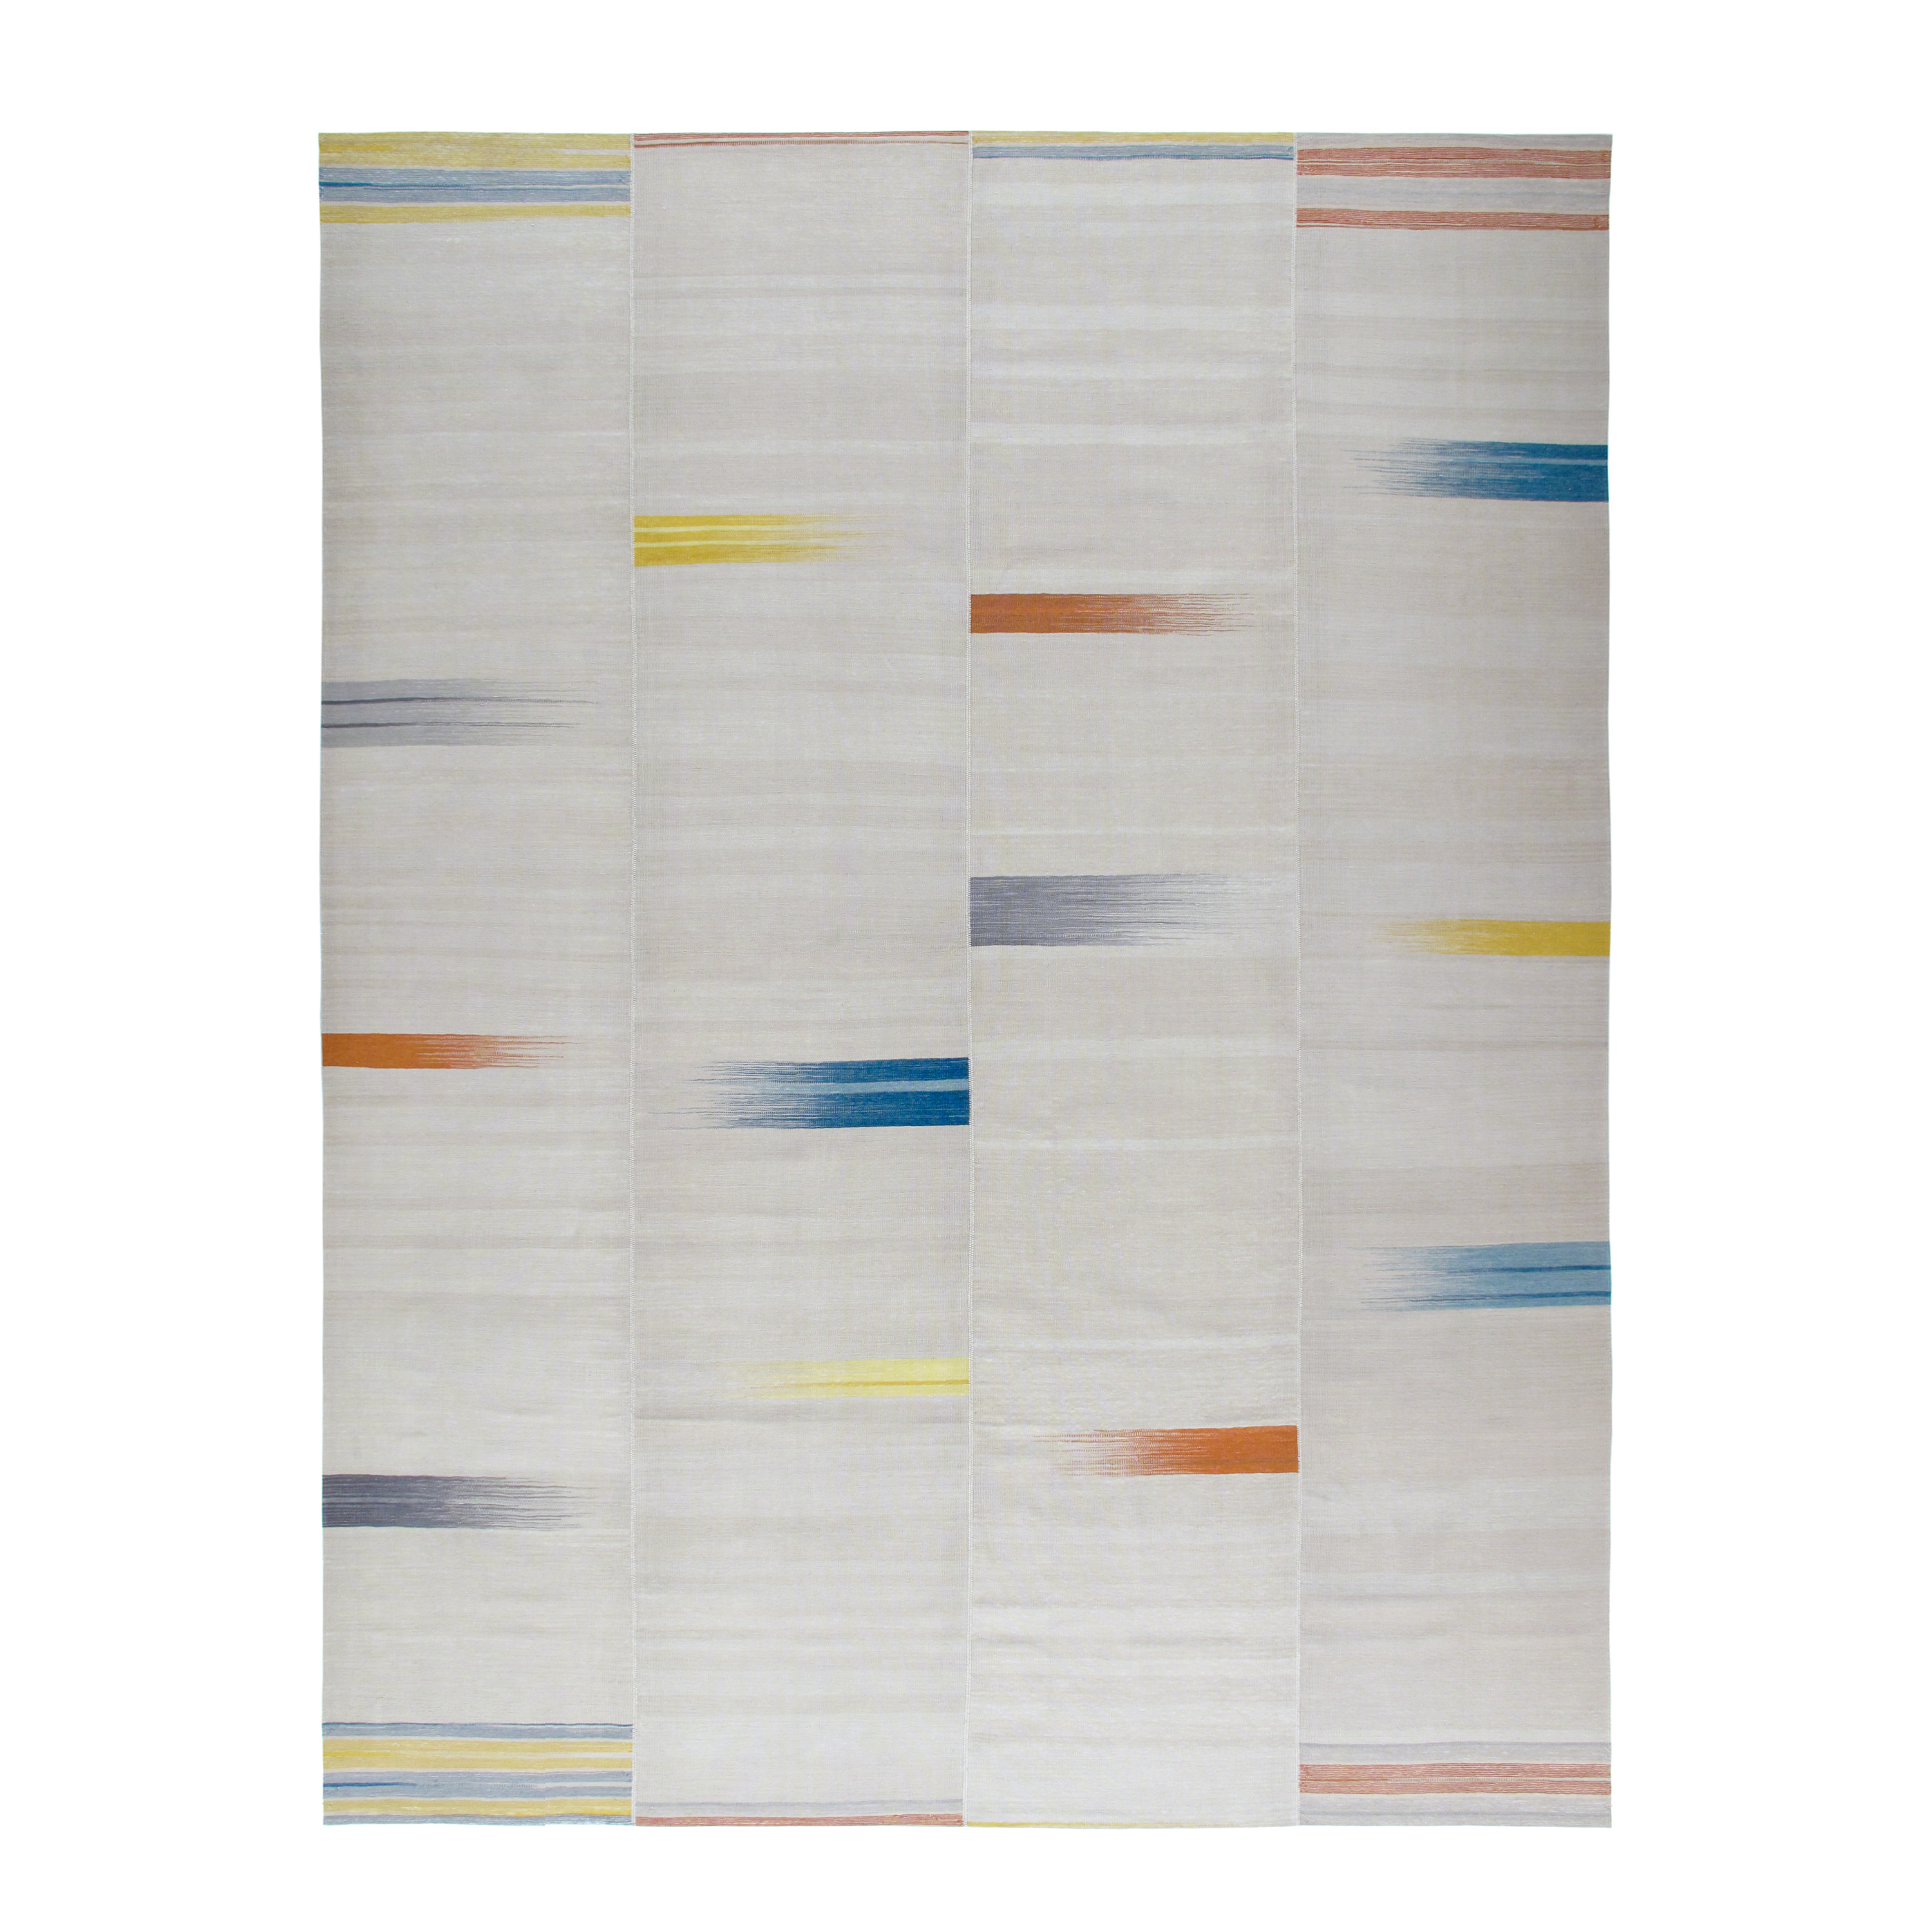 This Mazandaran rug is highlights the minimalist sophistication that existed long before the modern era. 